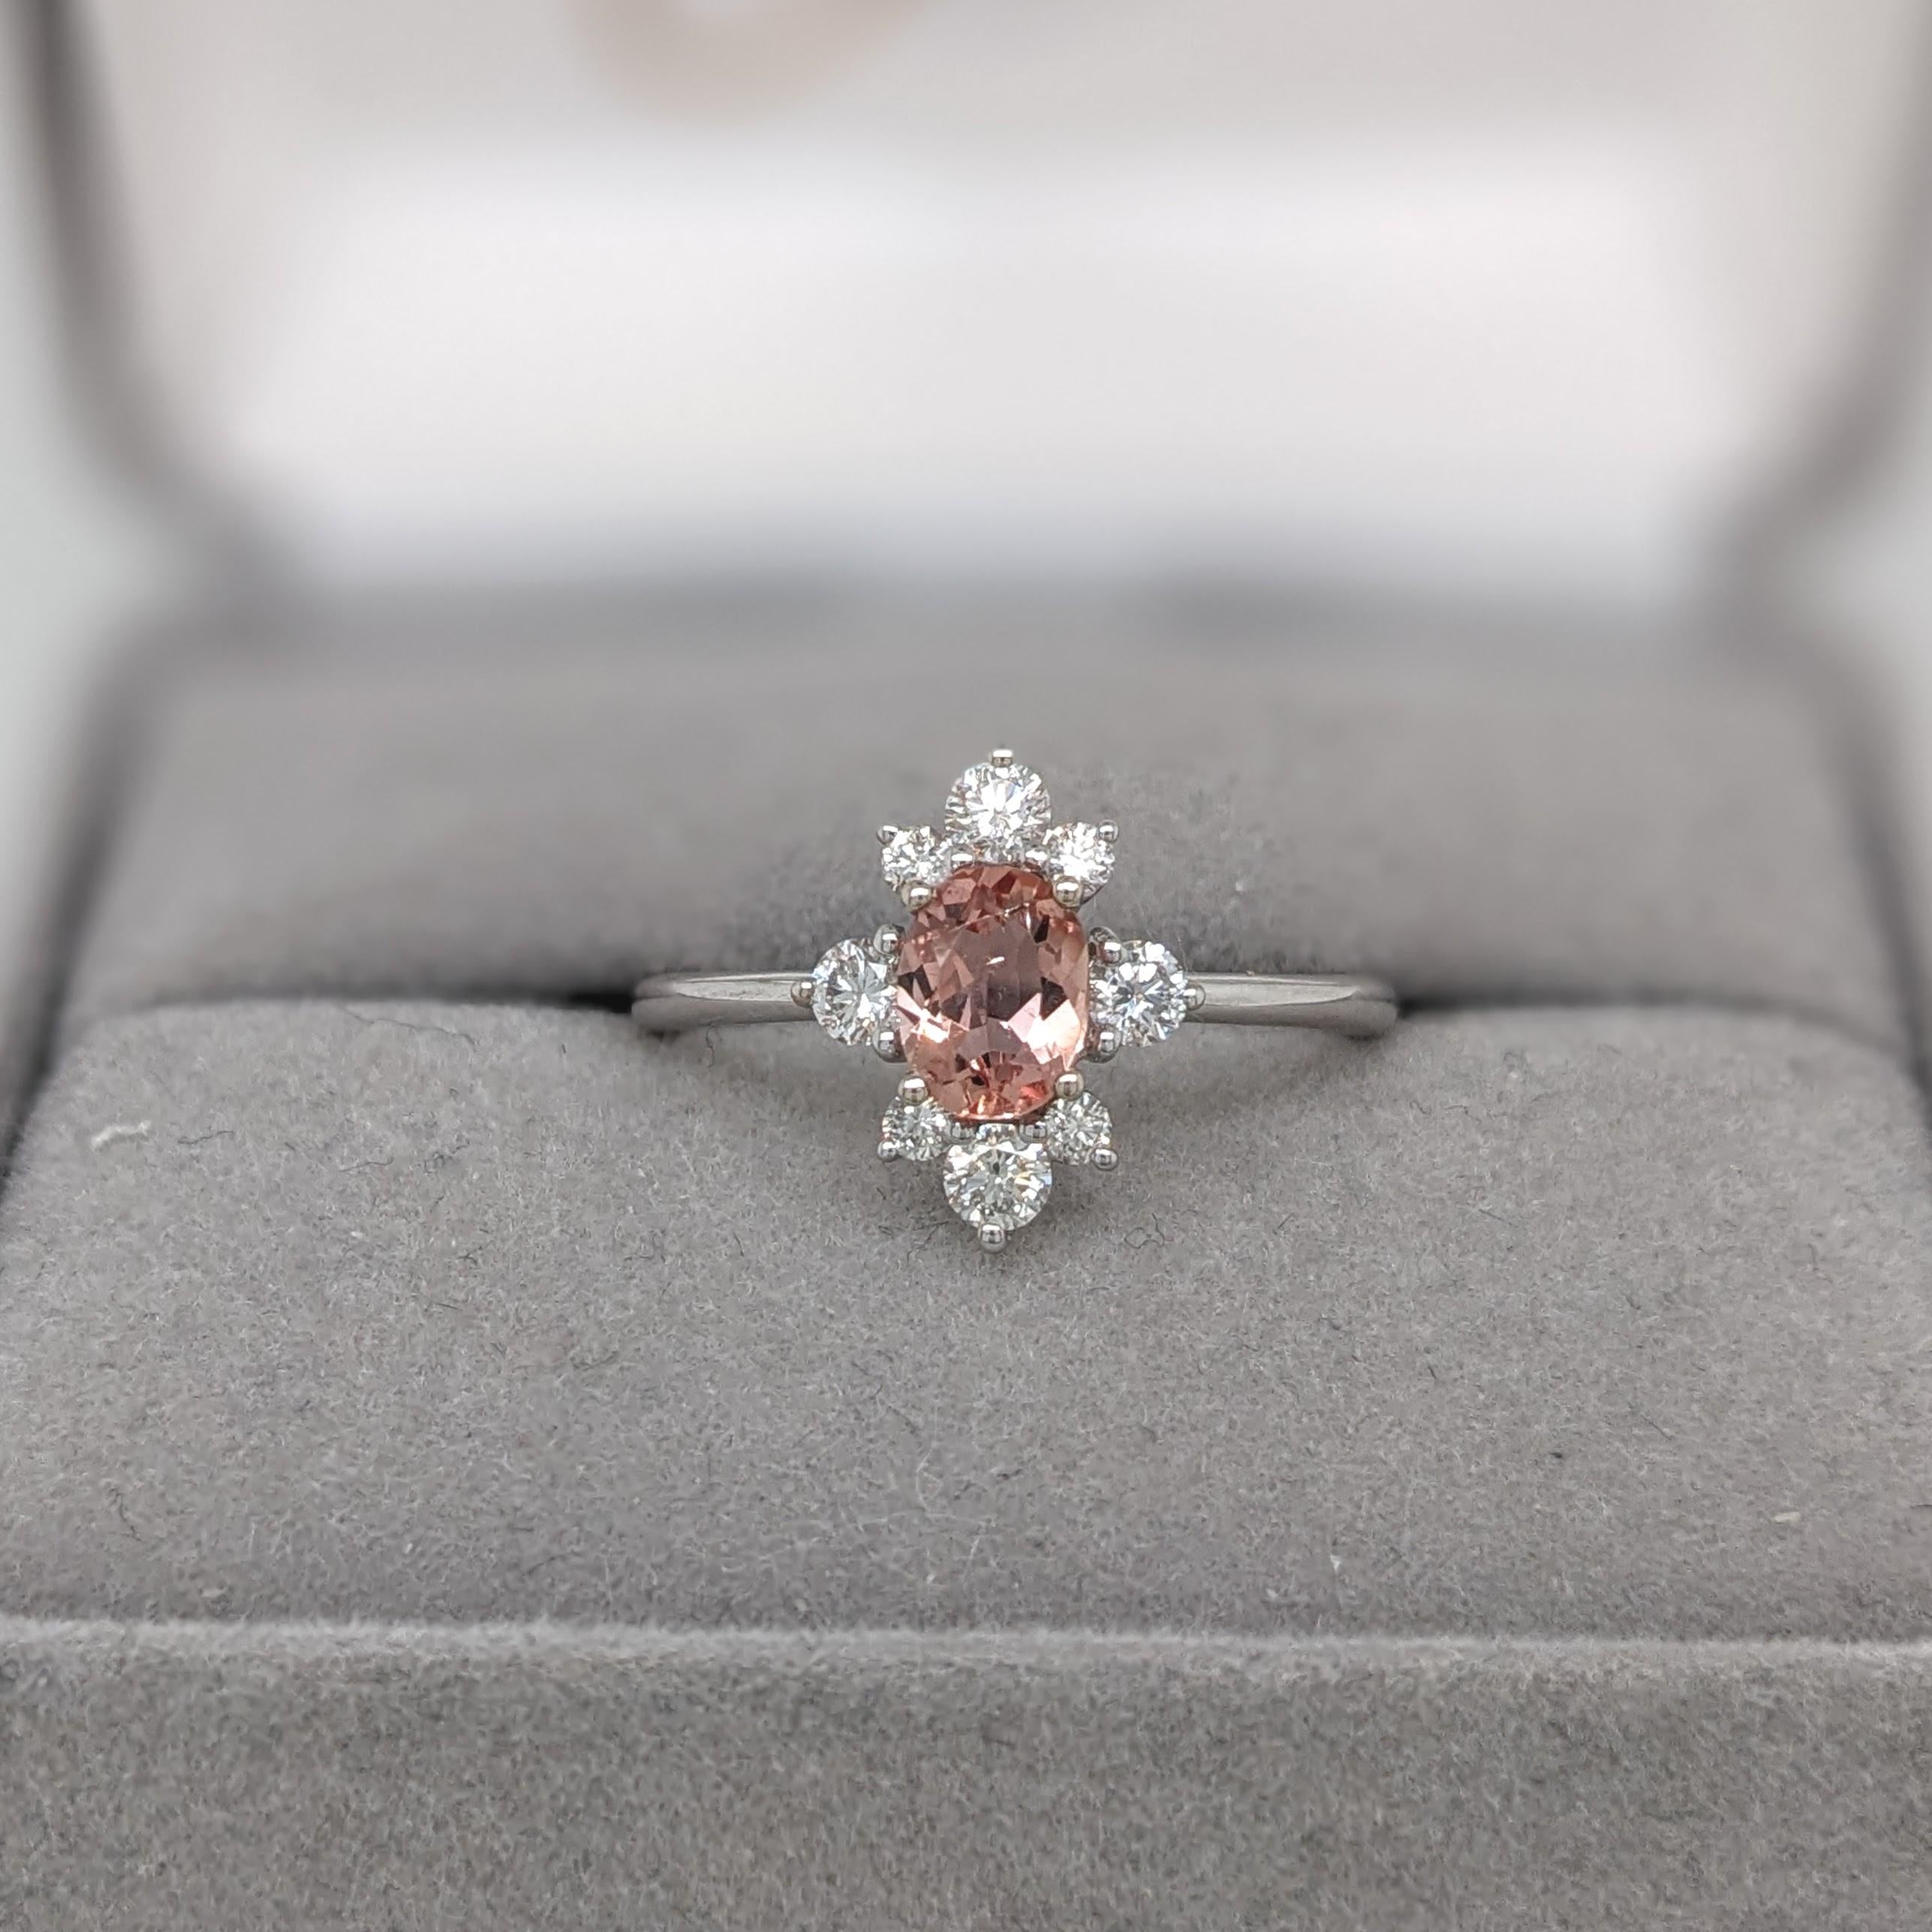 Dainty Peachy Imperial Topaz Ring w Natural Diamonds in Solid 14k White Gold